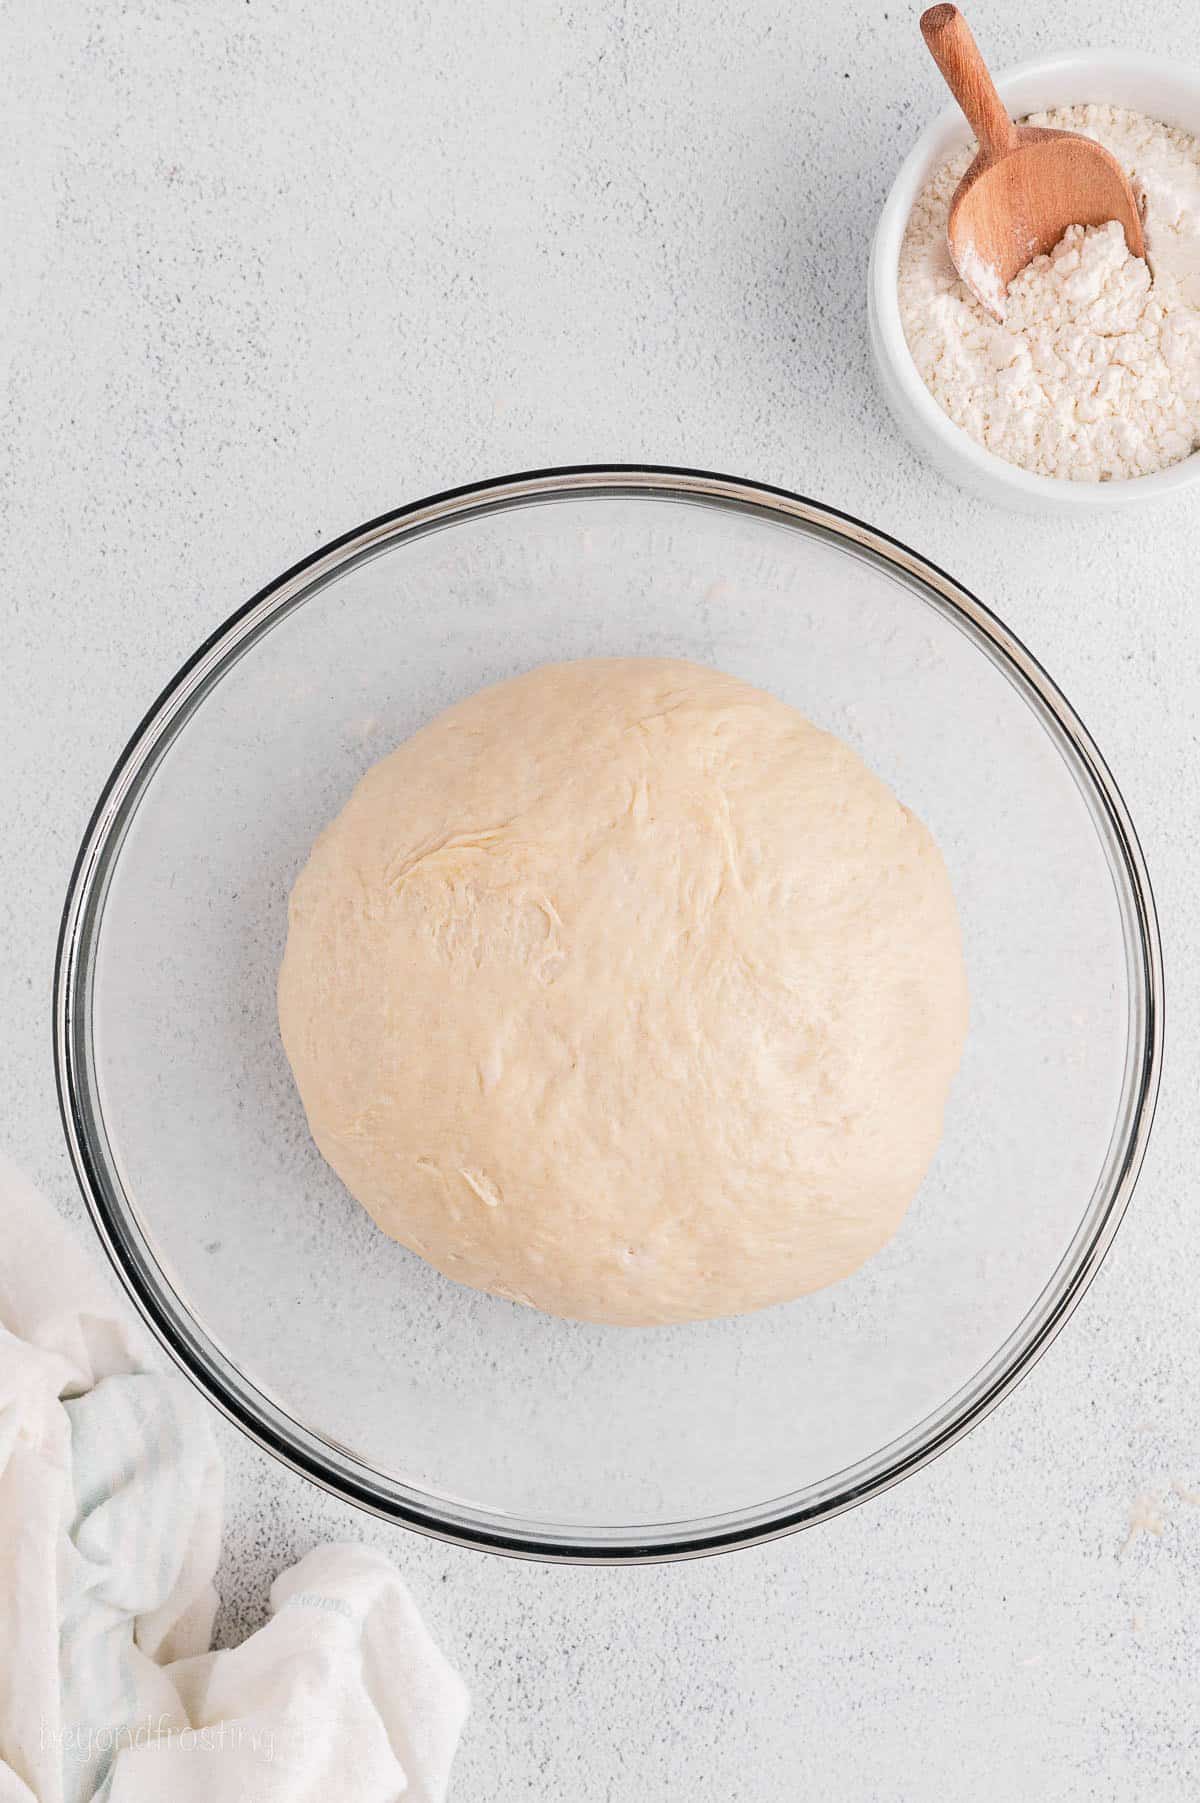 A ball of yeast dough in a mixing bowl